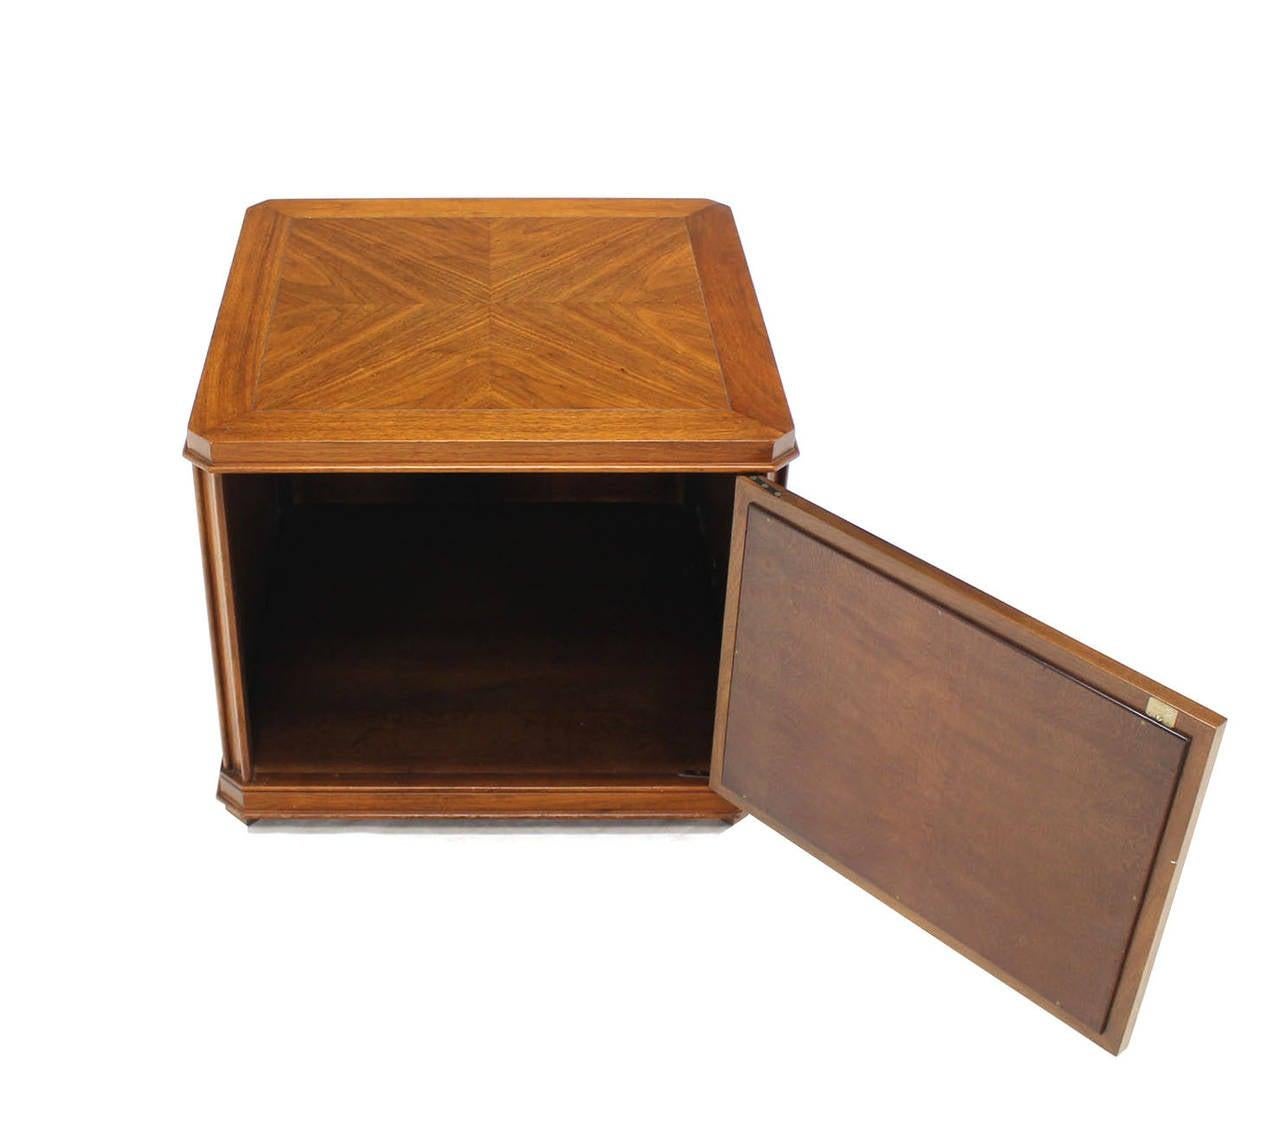 Walnut Carved Honeycomb Pattern One Door Cube Square Shape Side End Table Stand MINT!
One door storage compartment.